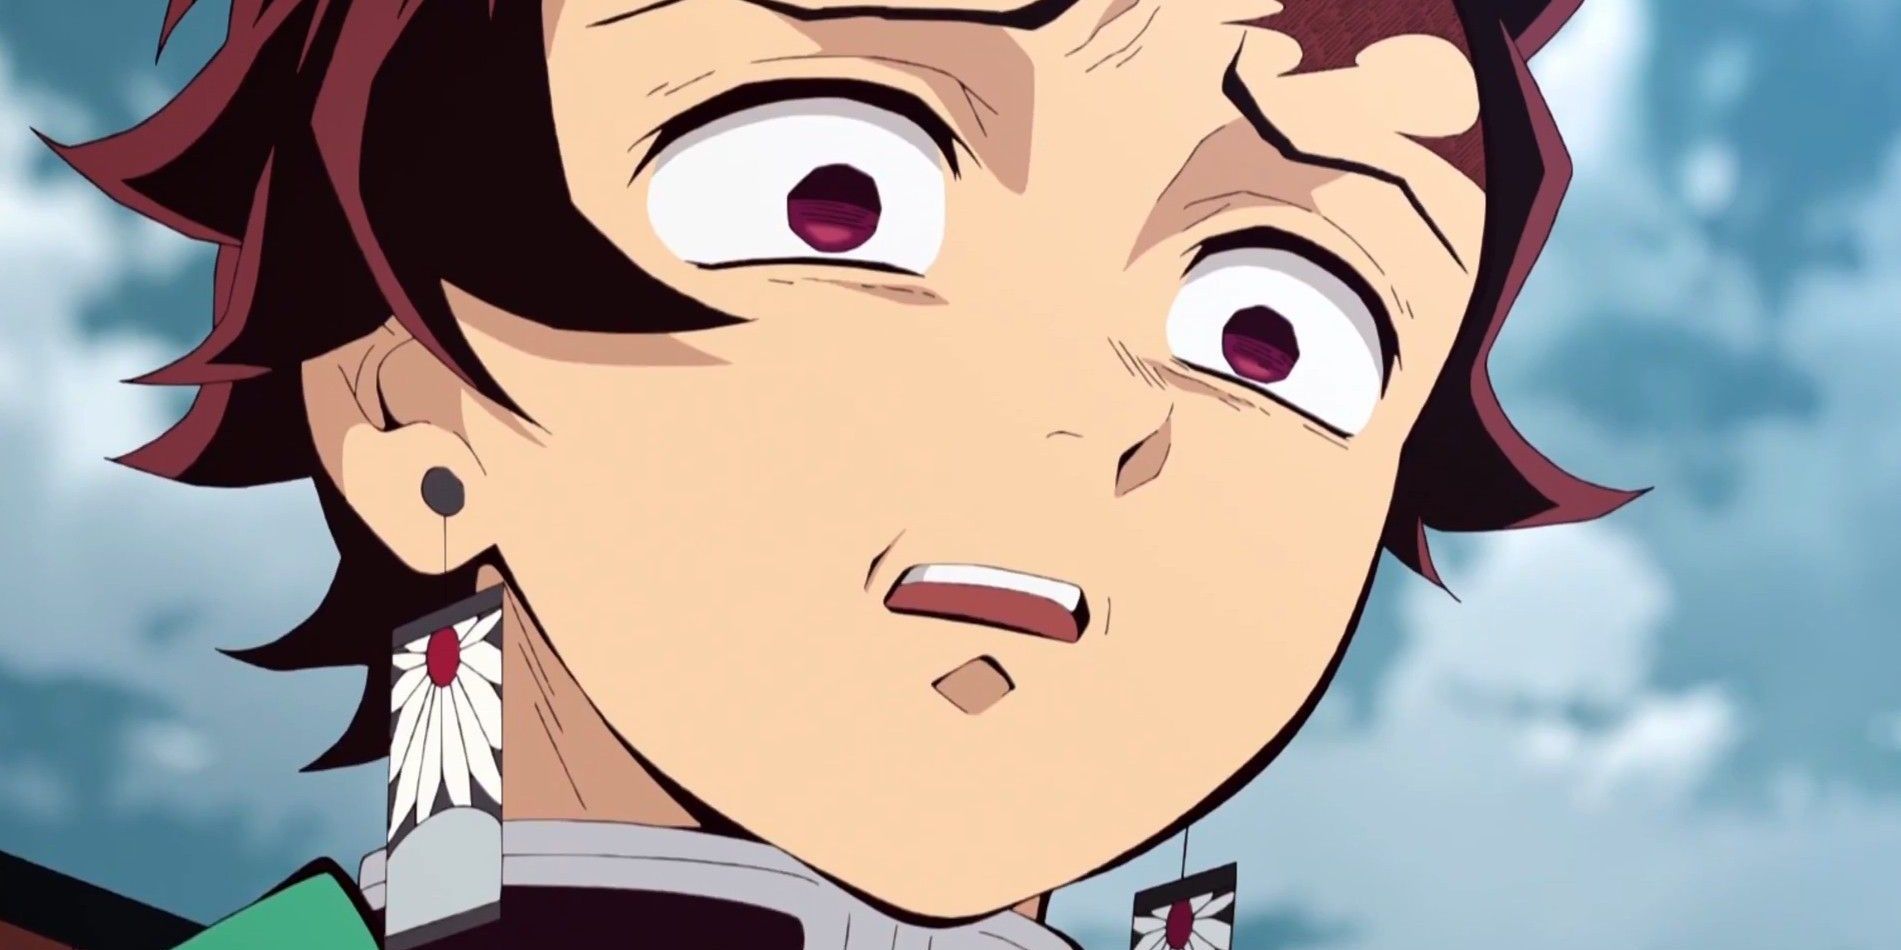 Tanjiro making a funny face in Demon Slayer